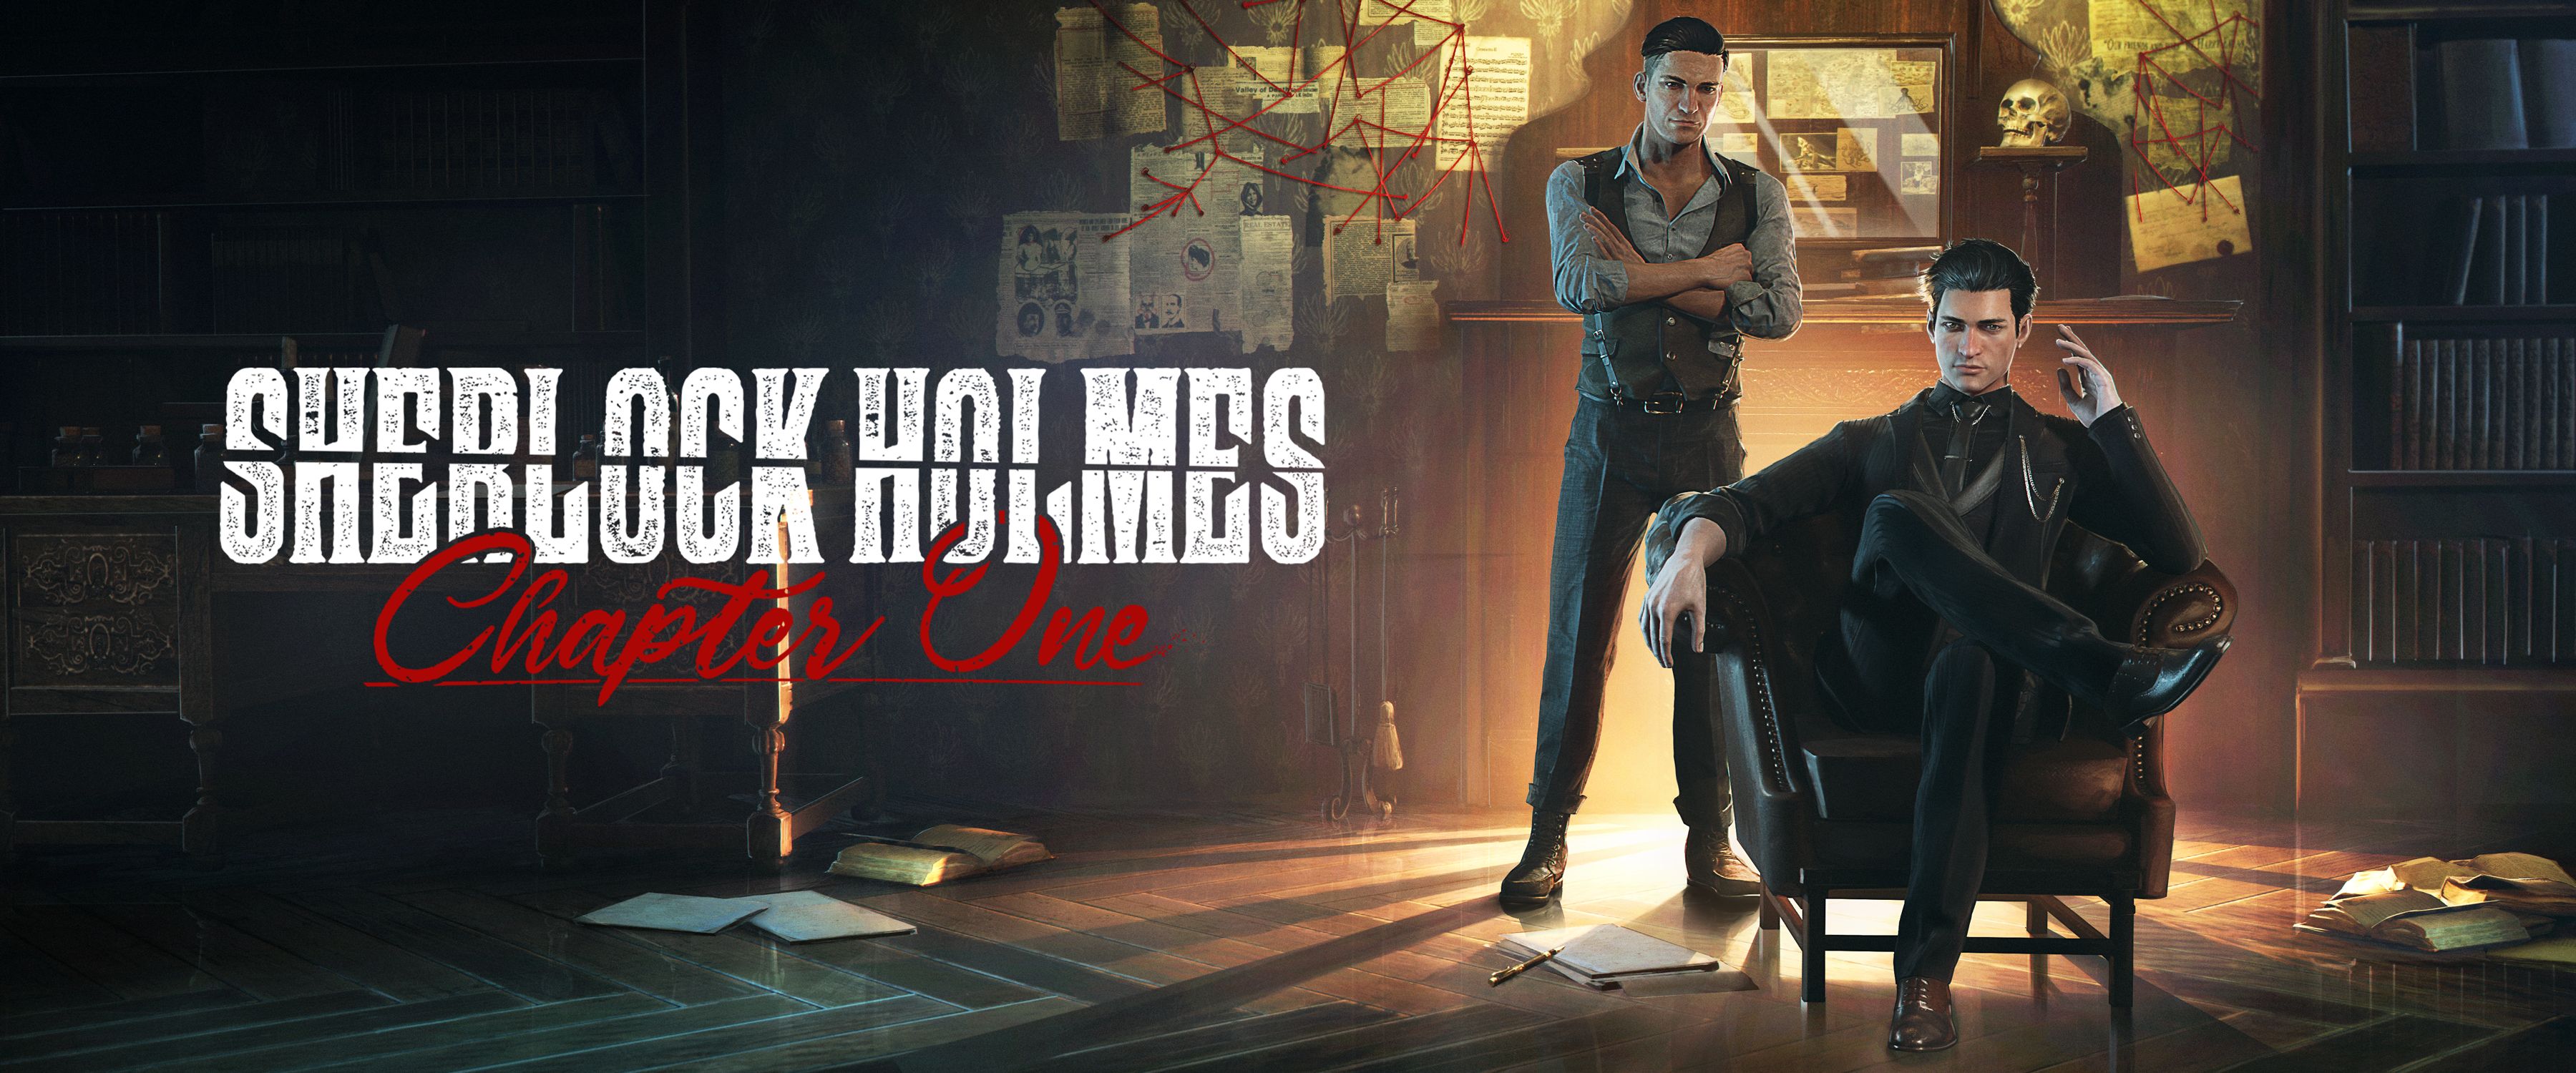 New chapter 1. Sherlock holmes Chapter one Постер. Sherlock holmes Chapter one обои.